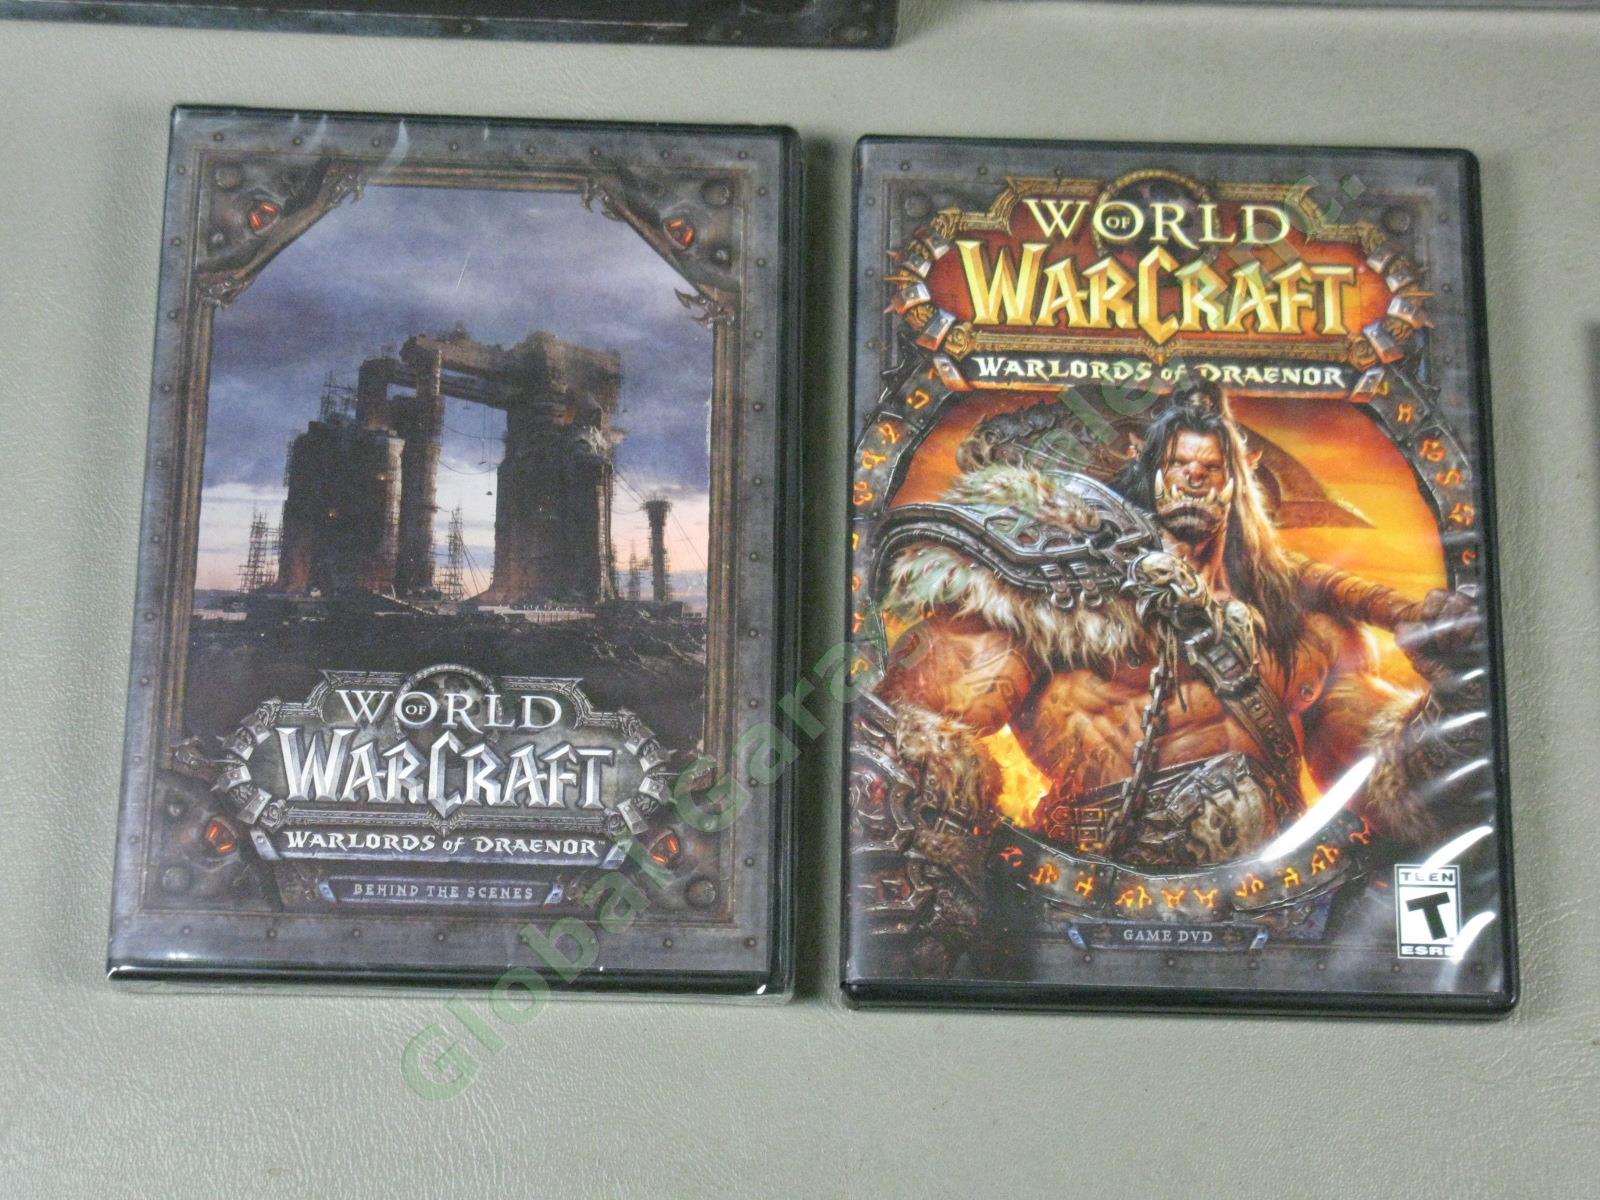 World Of Warcraft Warlords Of Draenor Collectors Edition Sealed Book CD DVD NR! 2